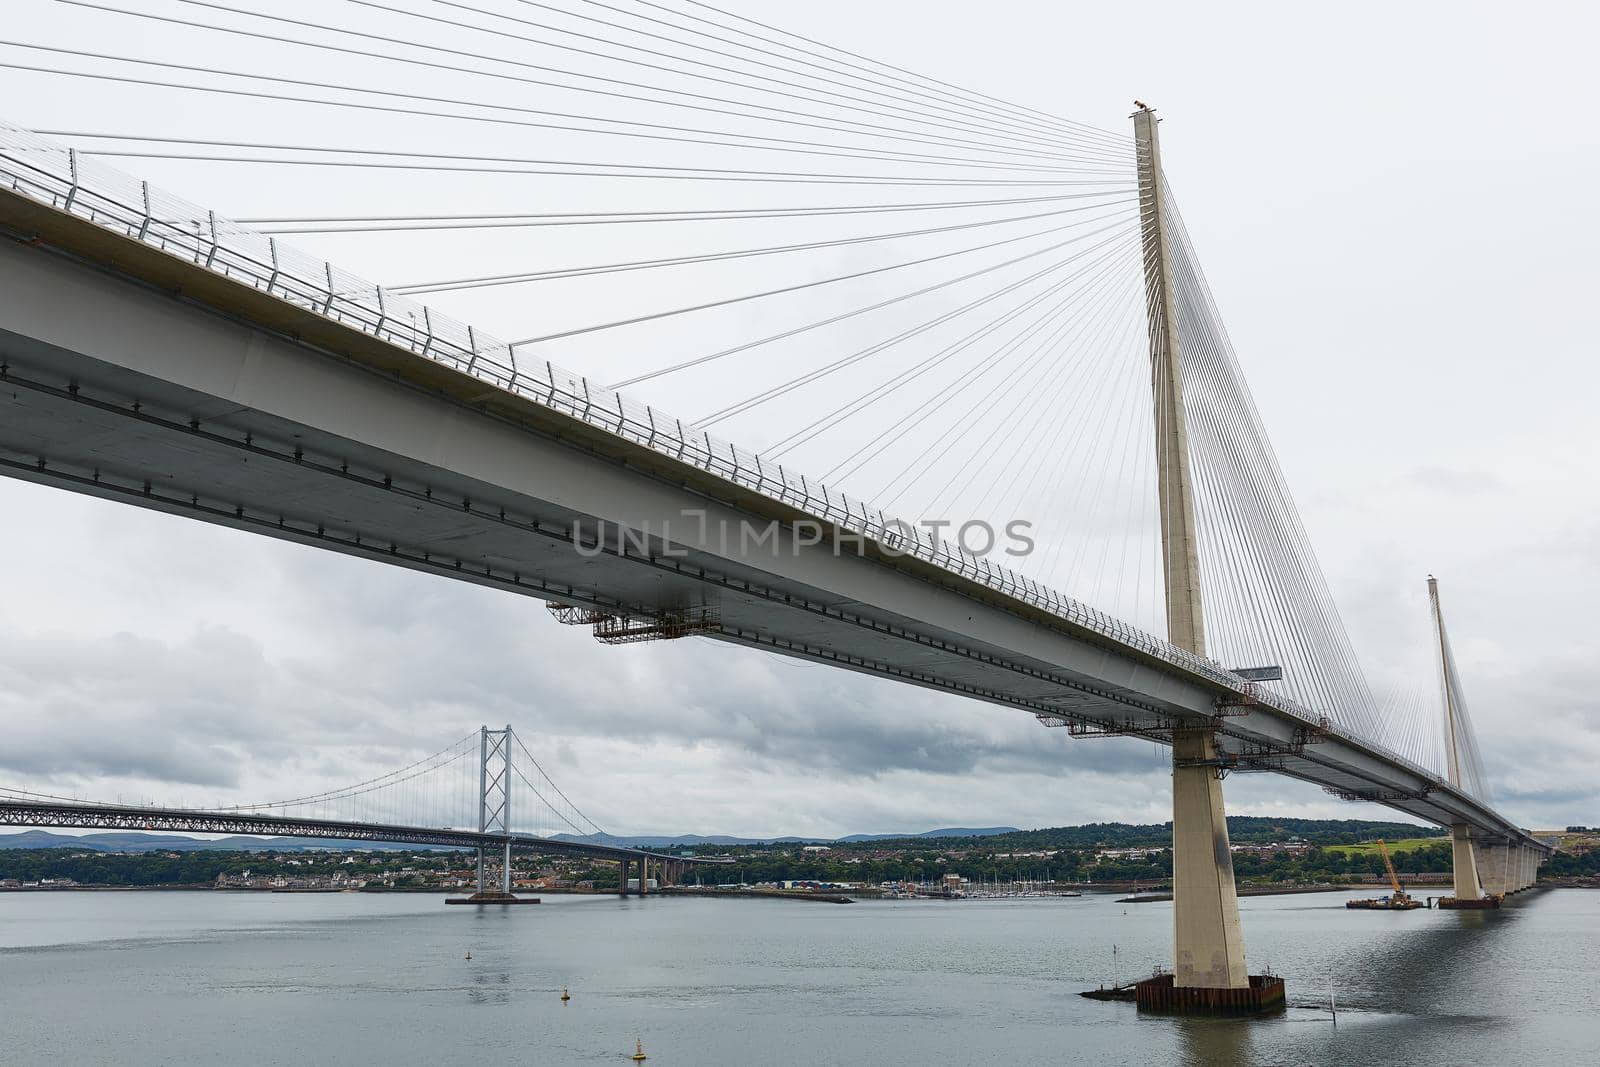 The new Queensferry Crossing bridge over the Firth of Forth with the older Forth Road bridge in Edinburgh Scotland